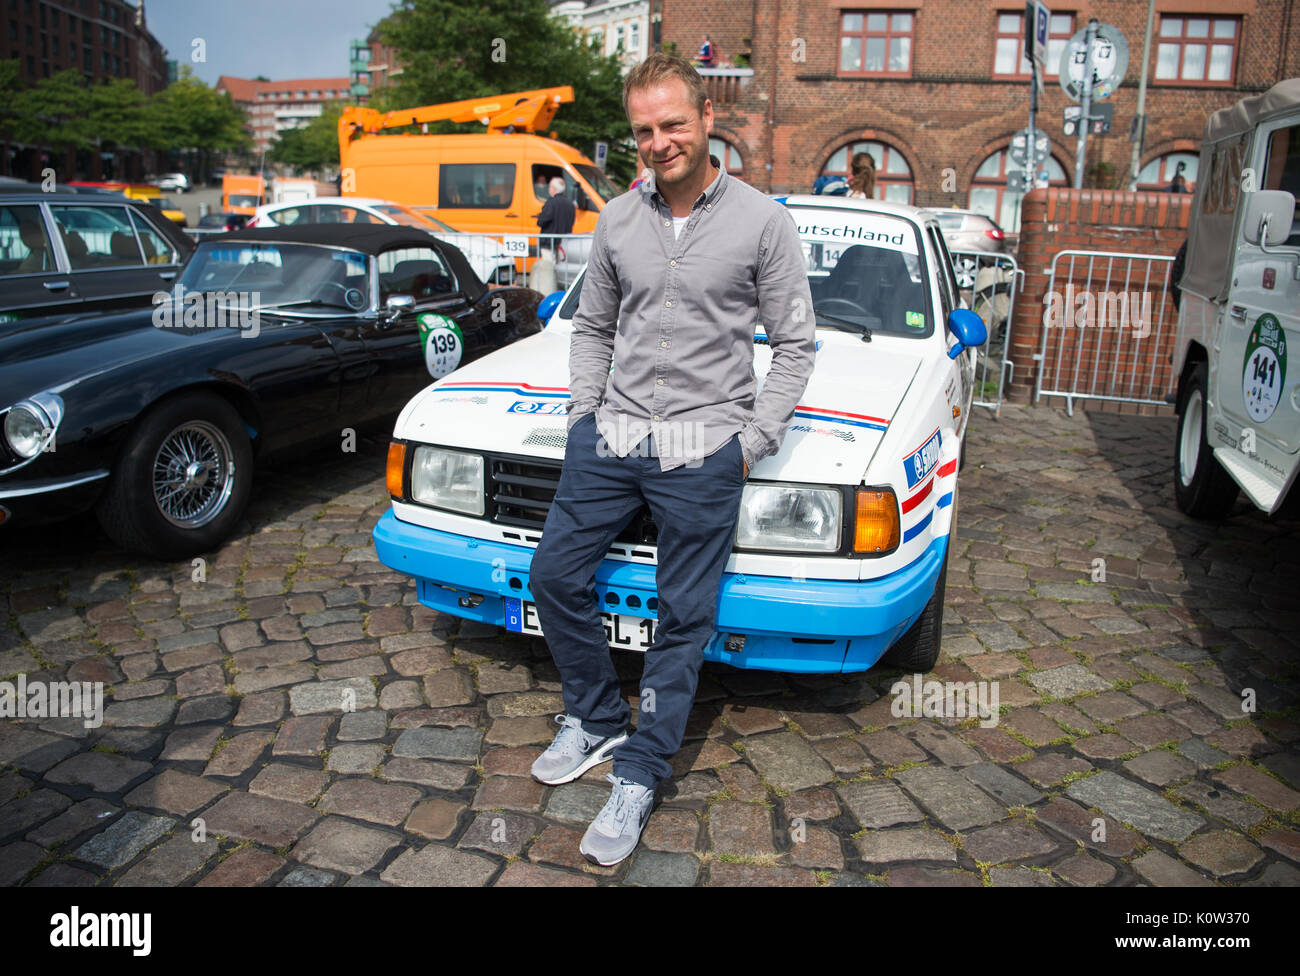 Hamburg, Germany. 24th Aug, 2017. The German actor Hinnerk Schoenemann is standing next to a Skoda 130 RS, built in 1976, at the start of the Hamburg-Berlin Vintage Car Rallye in Hamburg, Germany, 24 August 2017. About 180 vintage cars started the rallye today. Photo: Christophe Gateau/dpa/Alamy Live News Stock Photo